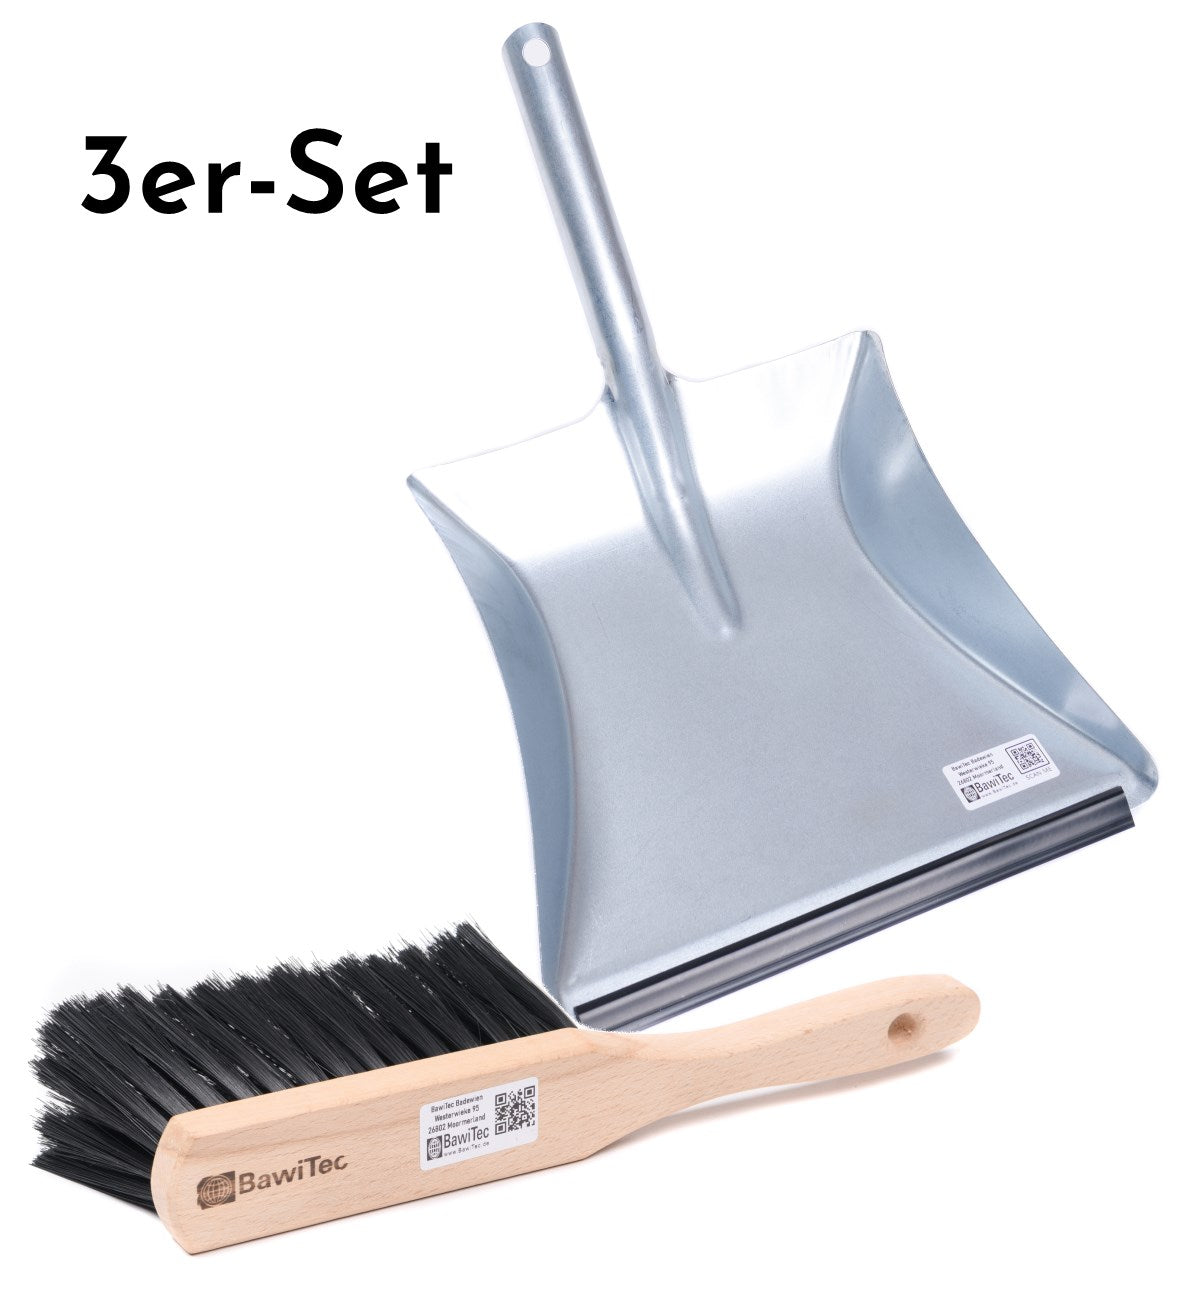 3 piece sweeping set, industrial sweeping set, synthetic hair bristles, hand brush 28cm and metal dustpan with lip 